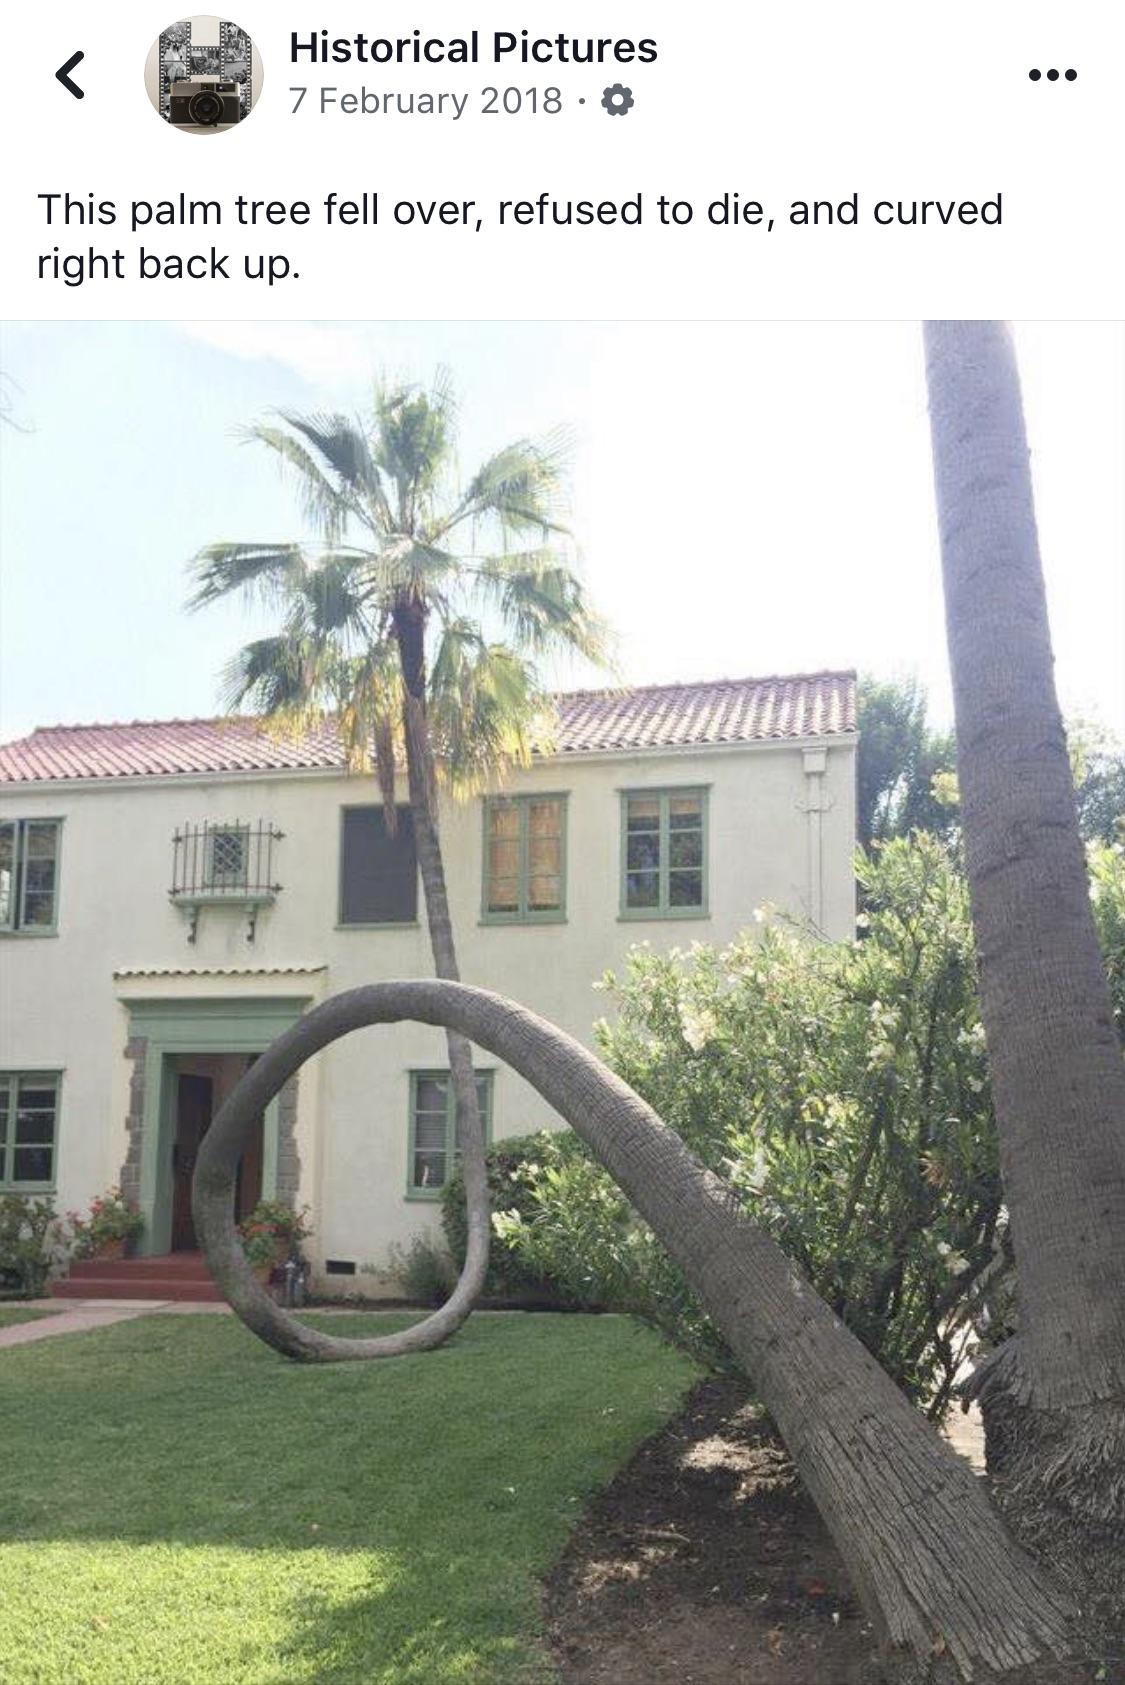 cool random pics and memes - funny tree grow - Historical Pictures . This palm tree fell over, refused to die, and curved right back up. S